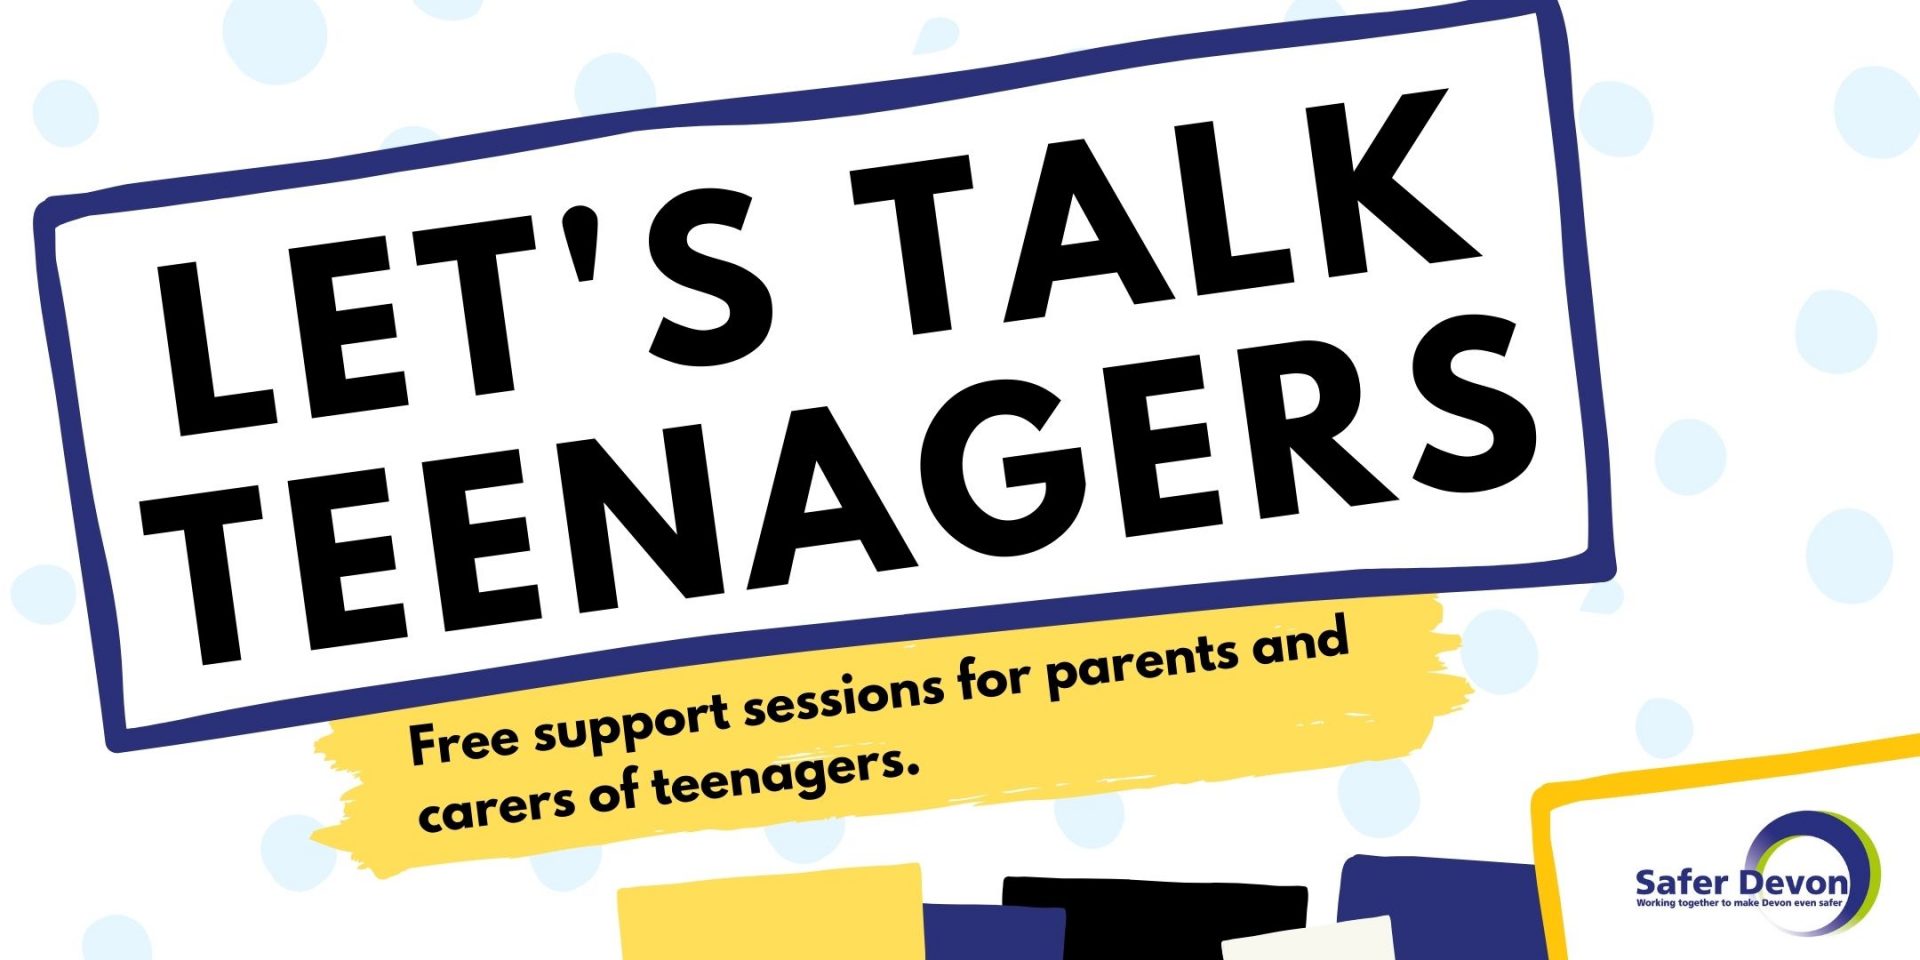 Let's Talk Teenagers - Free support sessions for parents and carers of teenagers